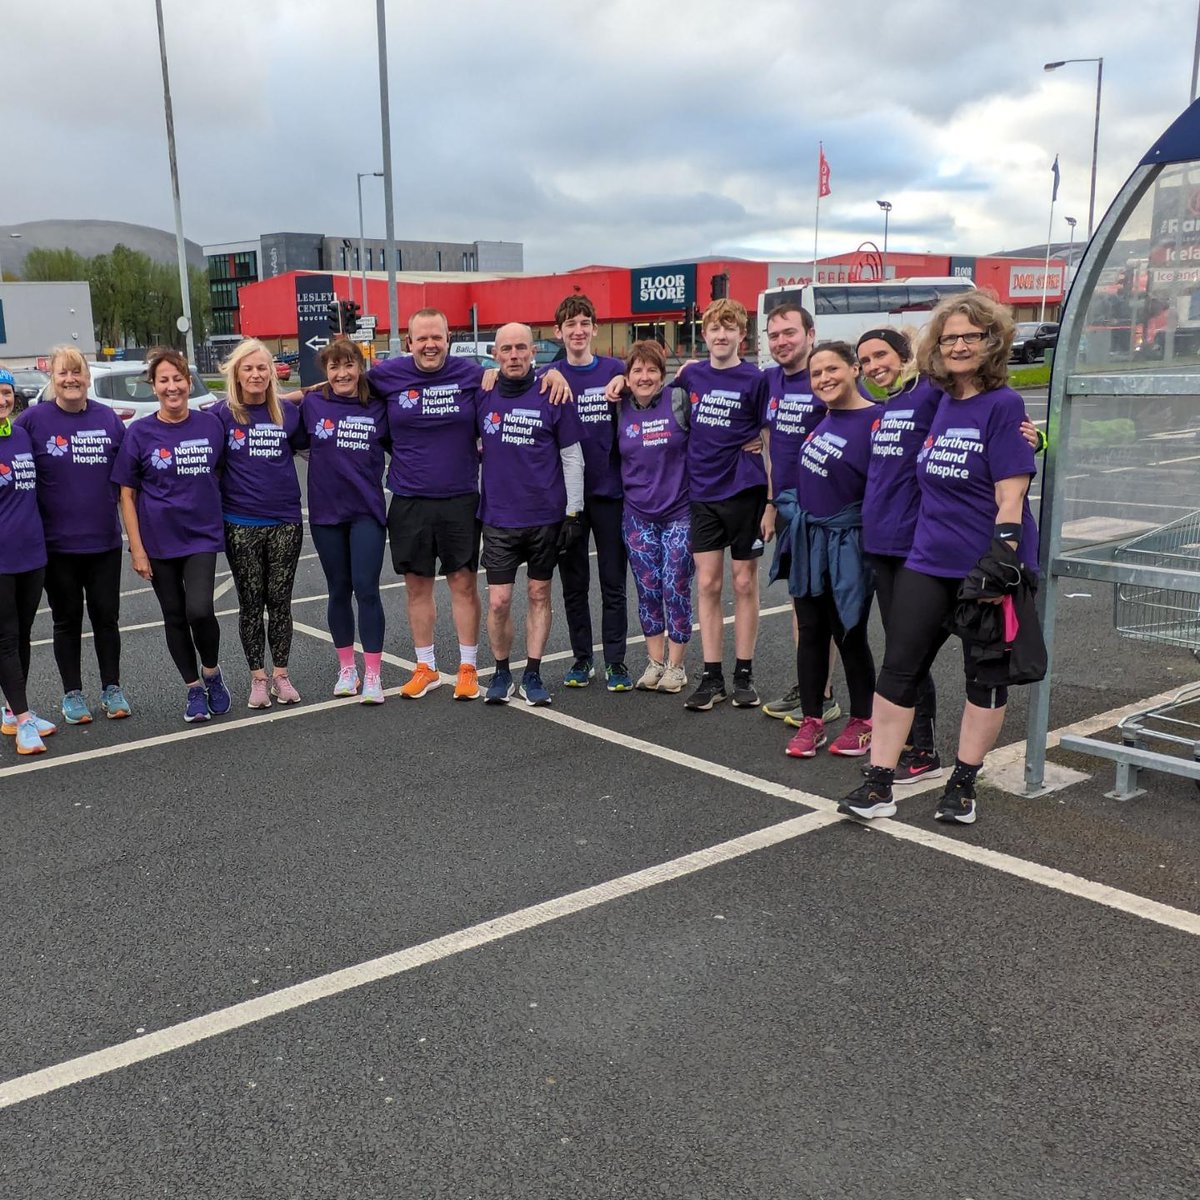 5. 💜 Monday will be our final training run in advance of The @marathonbcm - Leg 1. Look out for the purple tops as we continue to raise much needed funds for @NIHospice 💜 Wednesday will be our usual coached session and then it's all hands on deck to be organised for Sunday